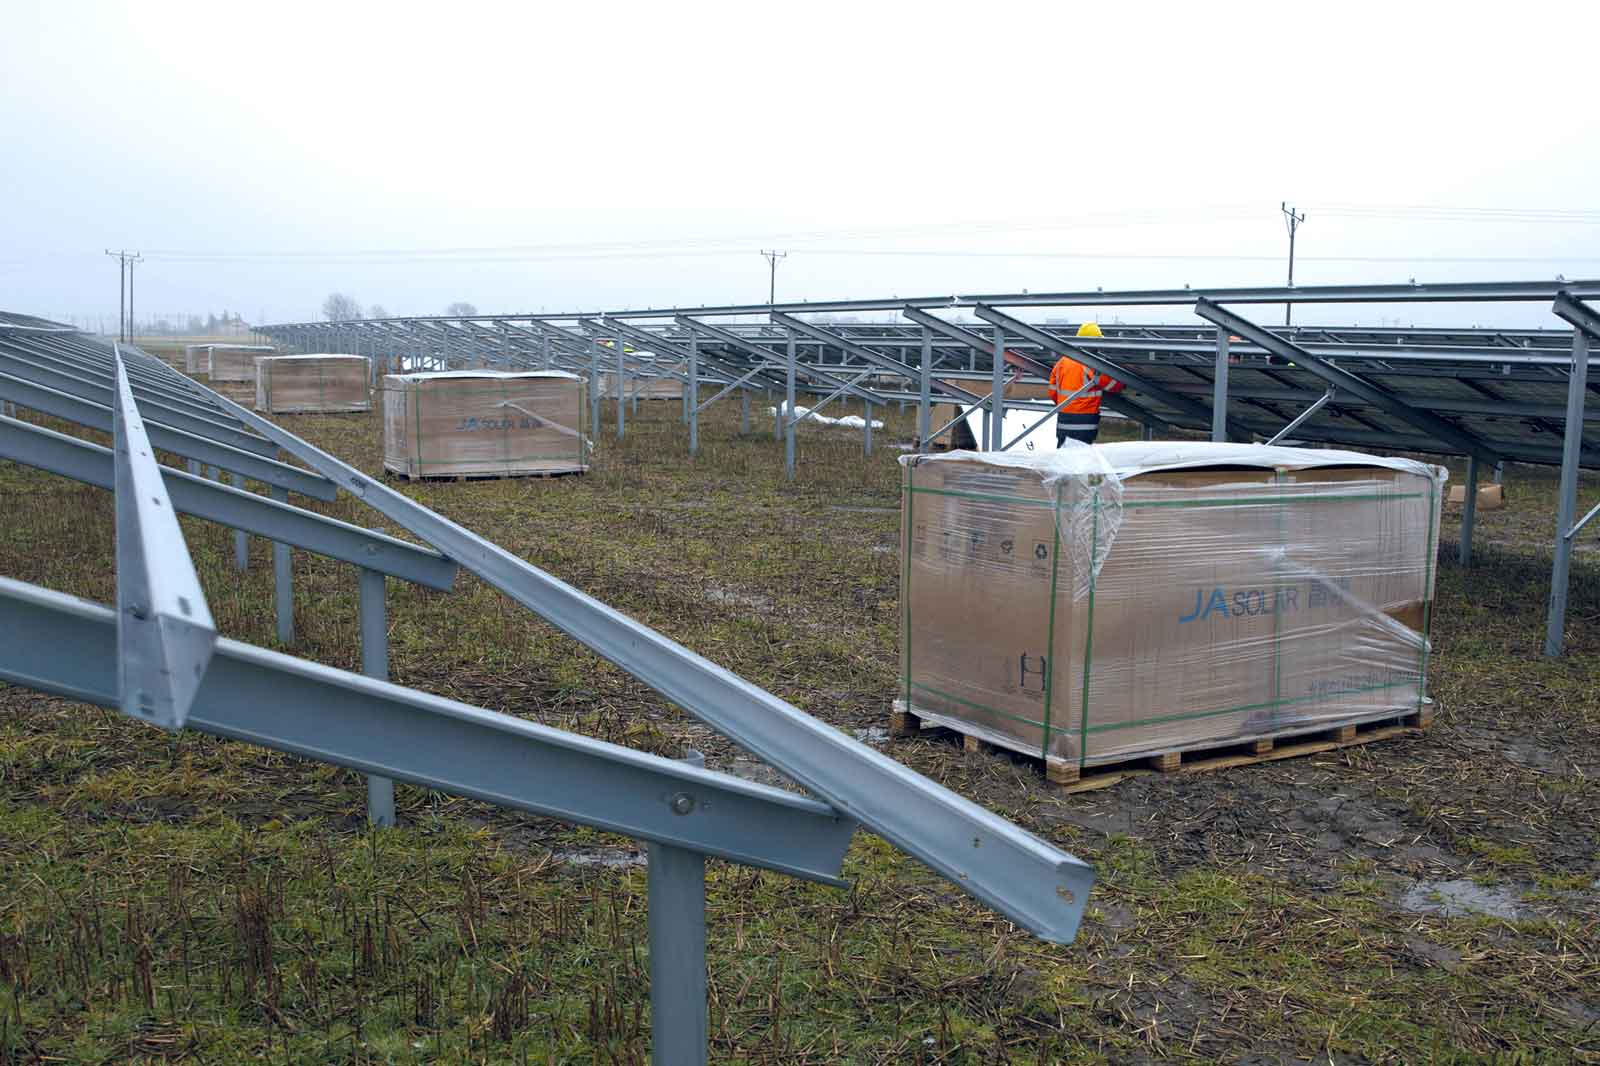 Material and processing at the construction site of a solar park | Discover renewables at RWE